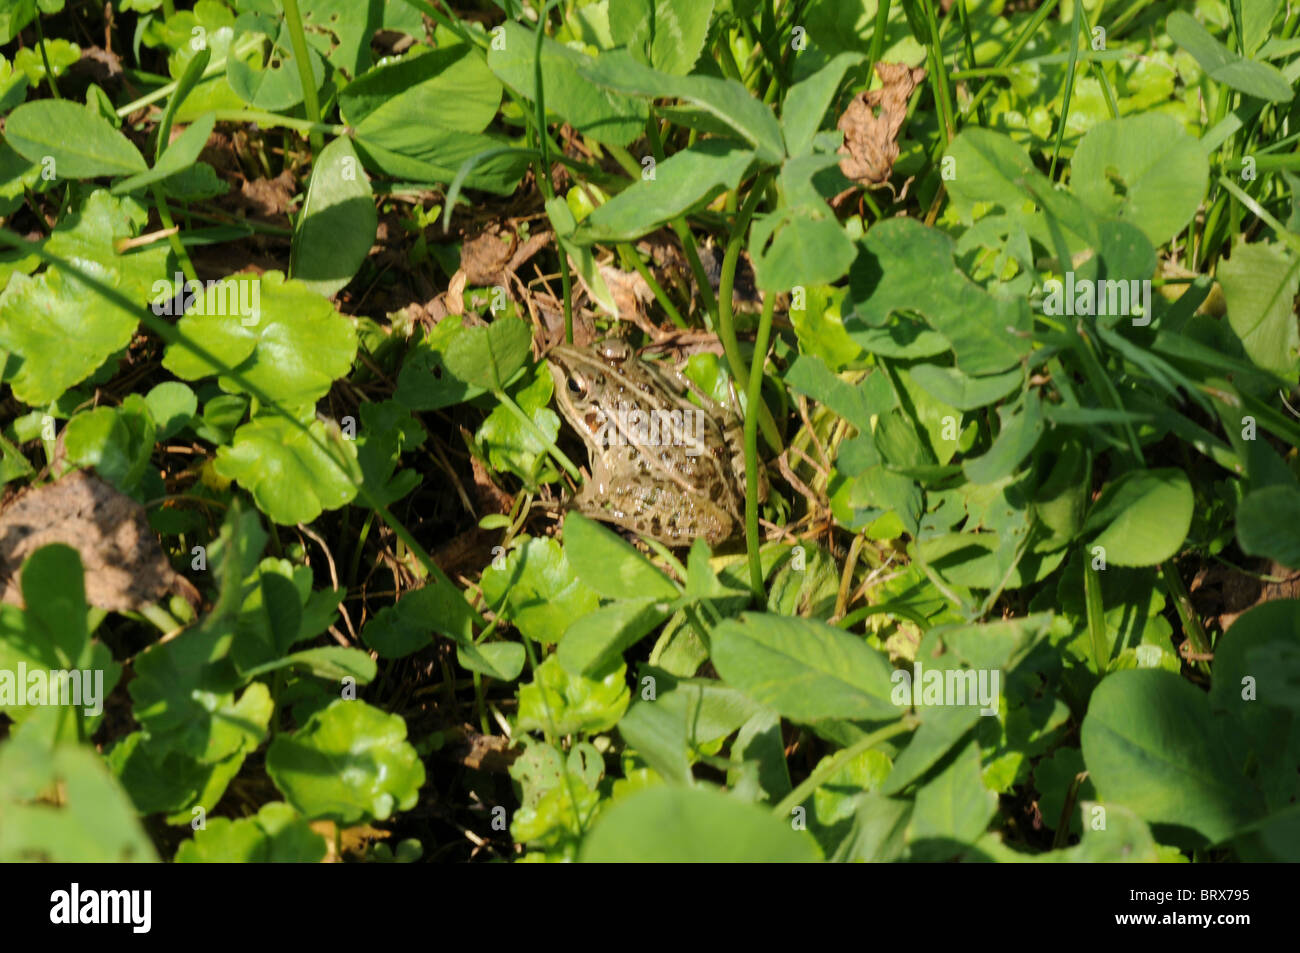 Frog in grass, Hyogo Prefecture, Honshu, Japan Stock Photo